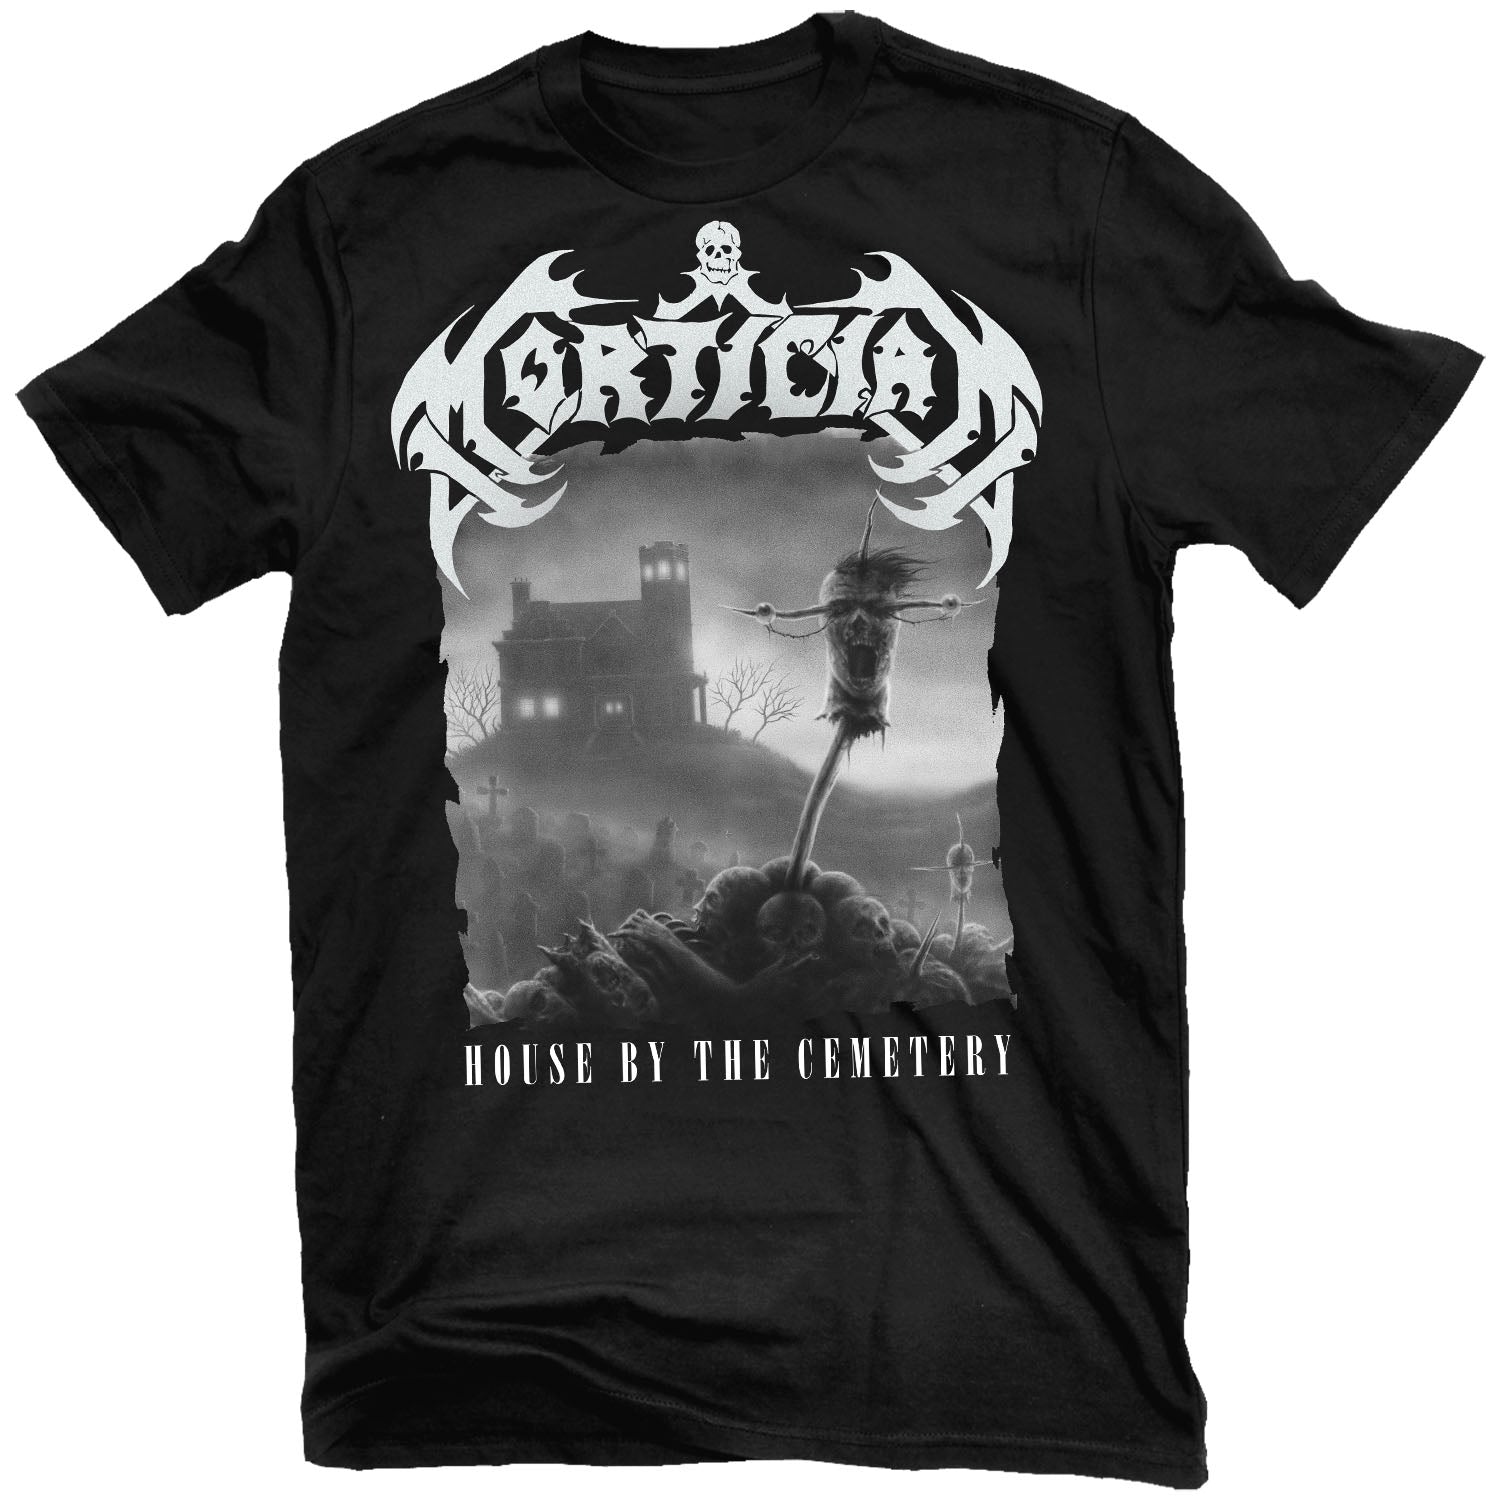 Mortician "House By The Cemetery" T-Shirt